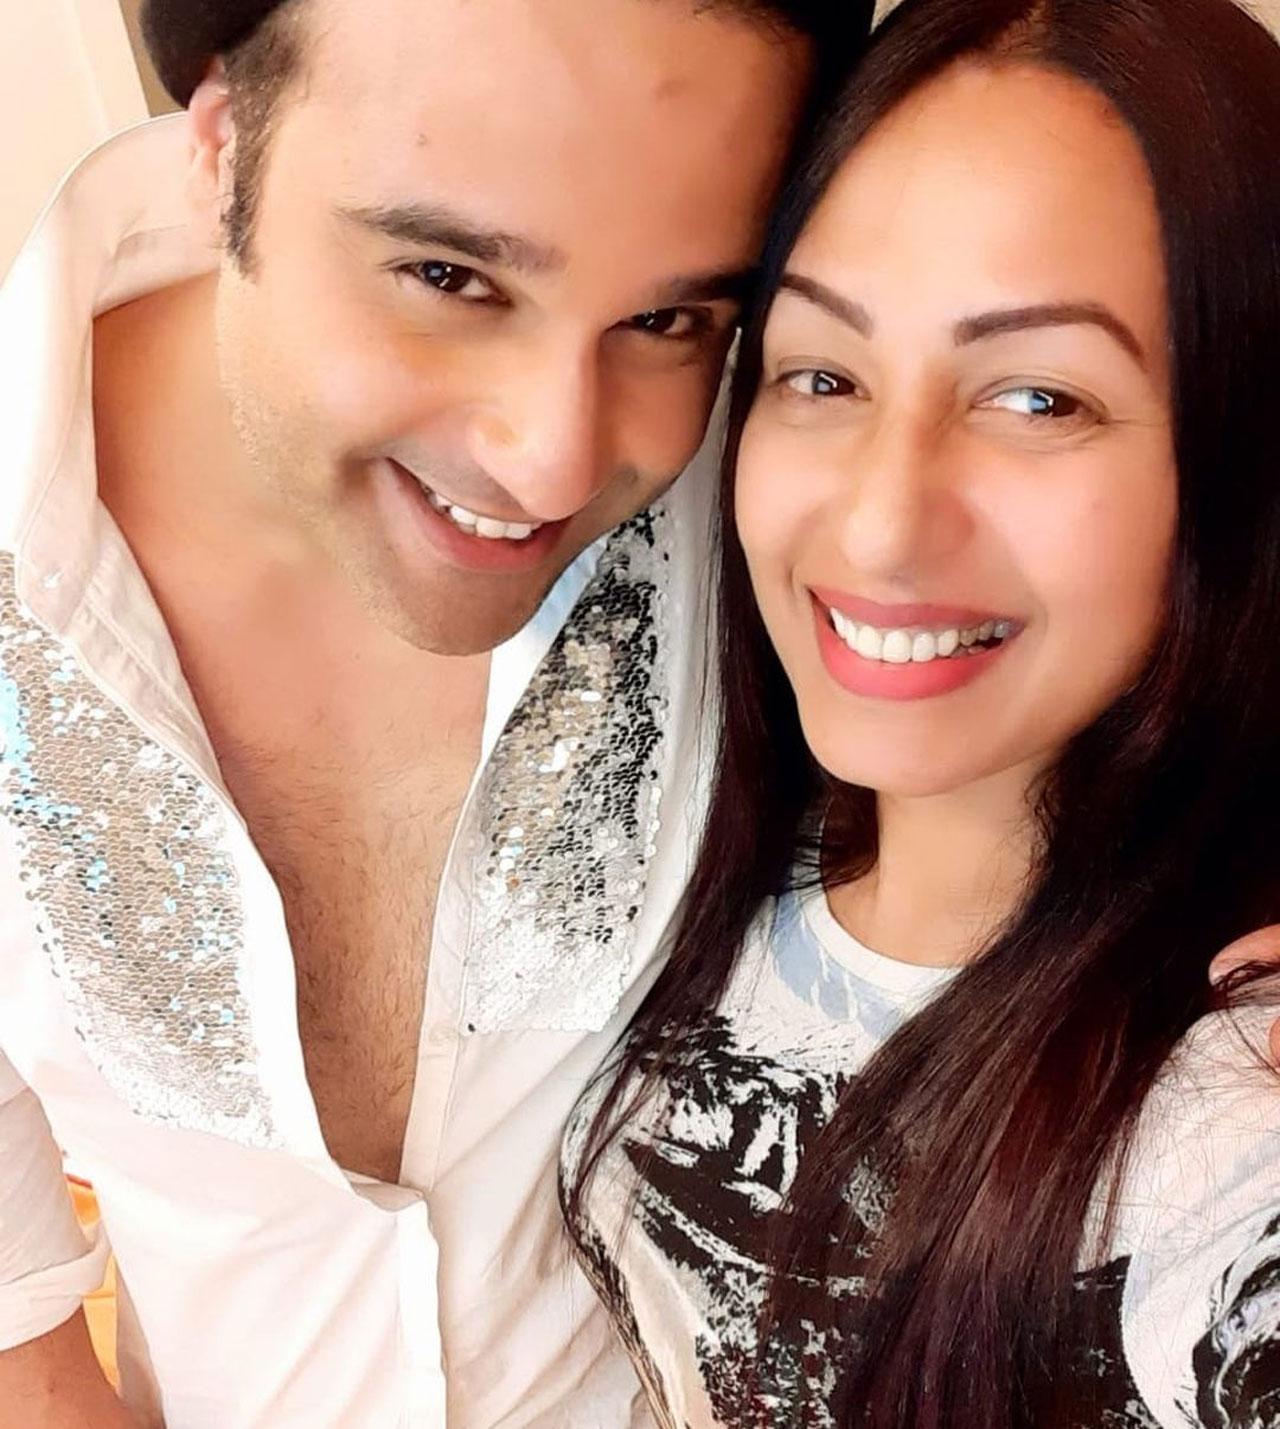 This was rather secretive wedding that happened in July 2013. In an interview with Times of India, Hera Pheri actress Kashmera Shah said she never wanted to get married to Krushna Abhishek as they were happily living together. She also revealed how the actor took him to a marriage registrar in the U.S and got married on July 23. “We were in a live-in relationship for more than six years and were living like husband and wife,” added Kashmera. (Picture Courtesy: Kashmera Shah's Official Instagram Account).